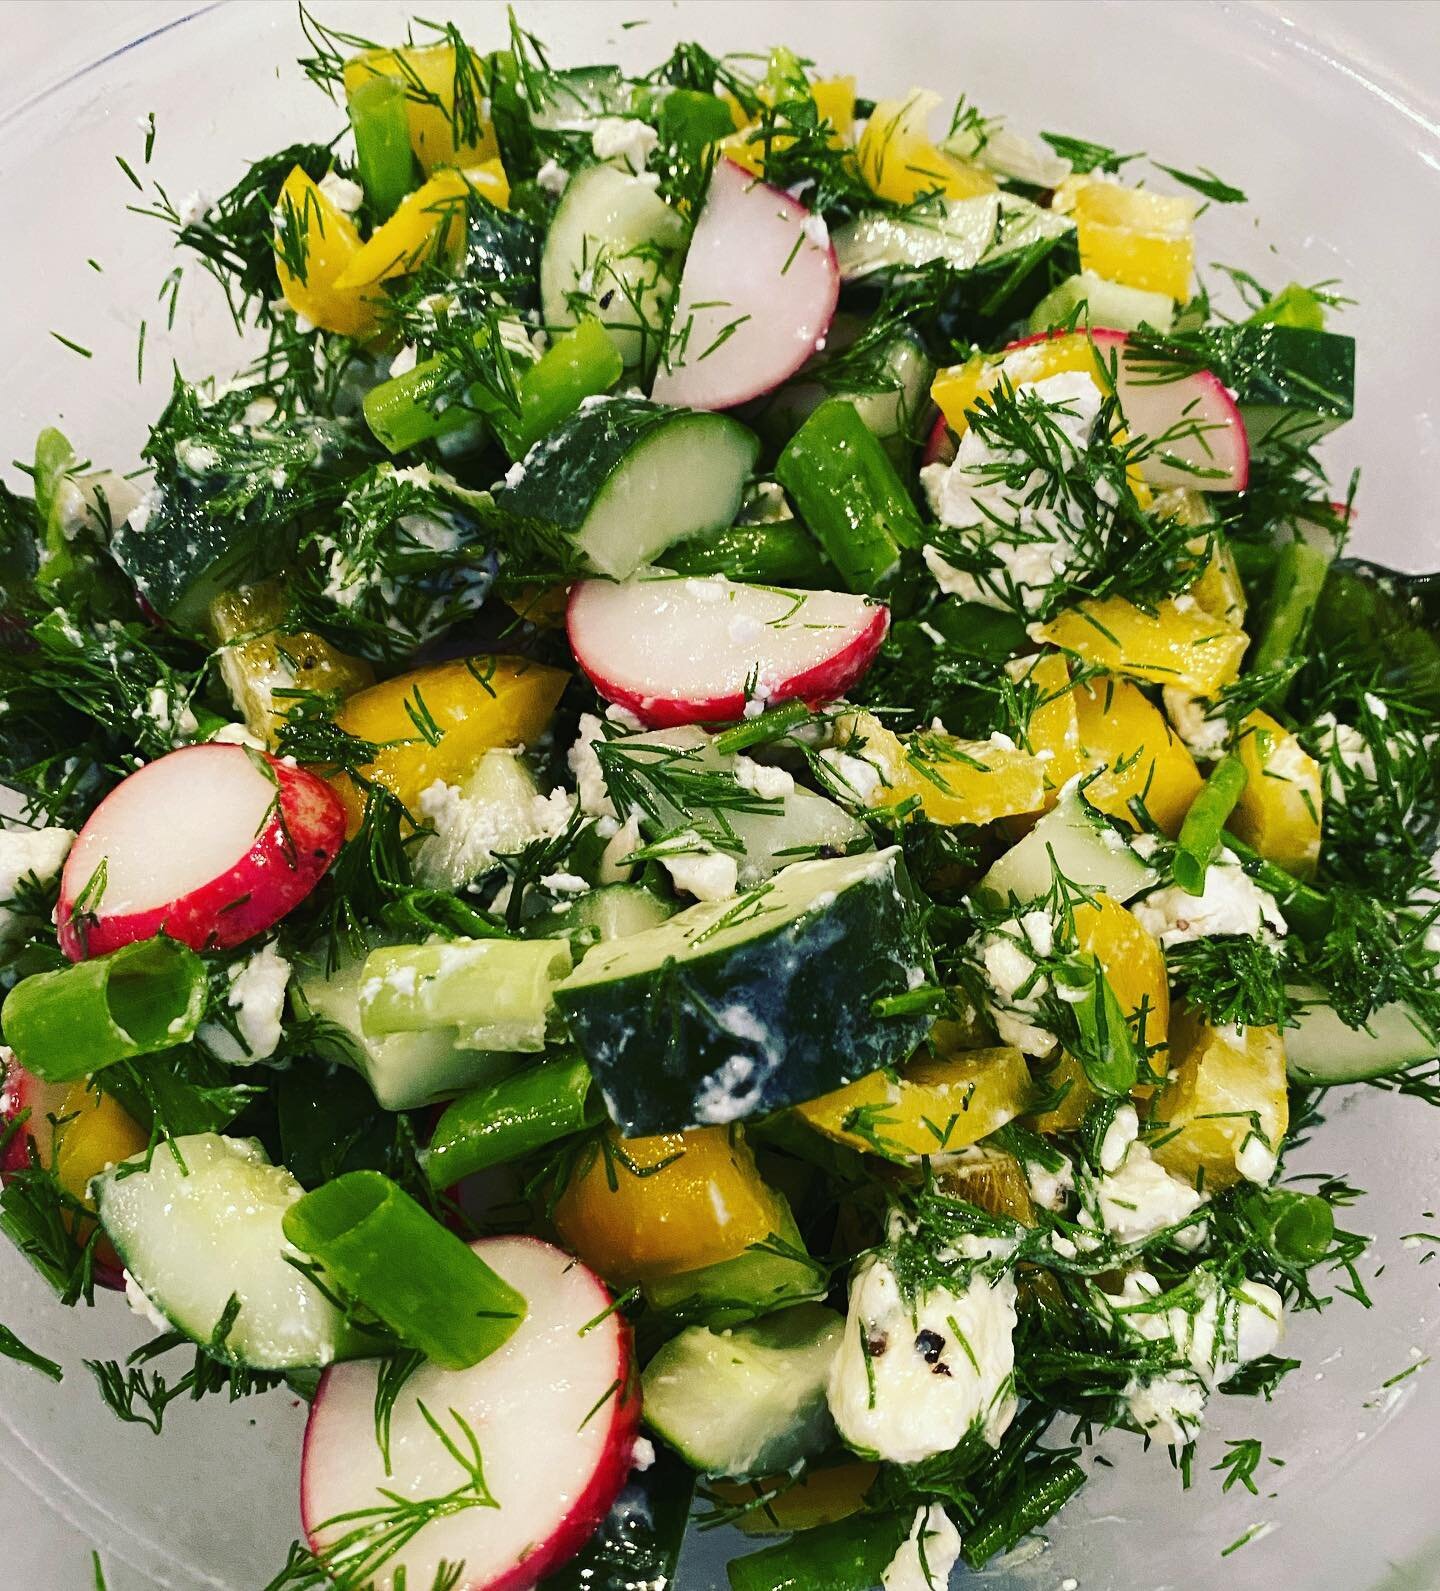 Threw this together and it turned out delish&mdash;cucumber, radish, yellow bell pepper, scallions, goat cheese, lots of dill, evoo &amp; lemon. Salad doesn&rsquo;t always need 🥬 ☺️
#eatmoreplants #foodismedicine #chappaquafarmersmarket